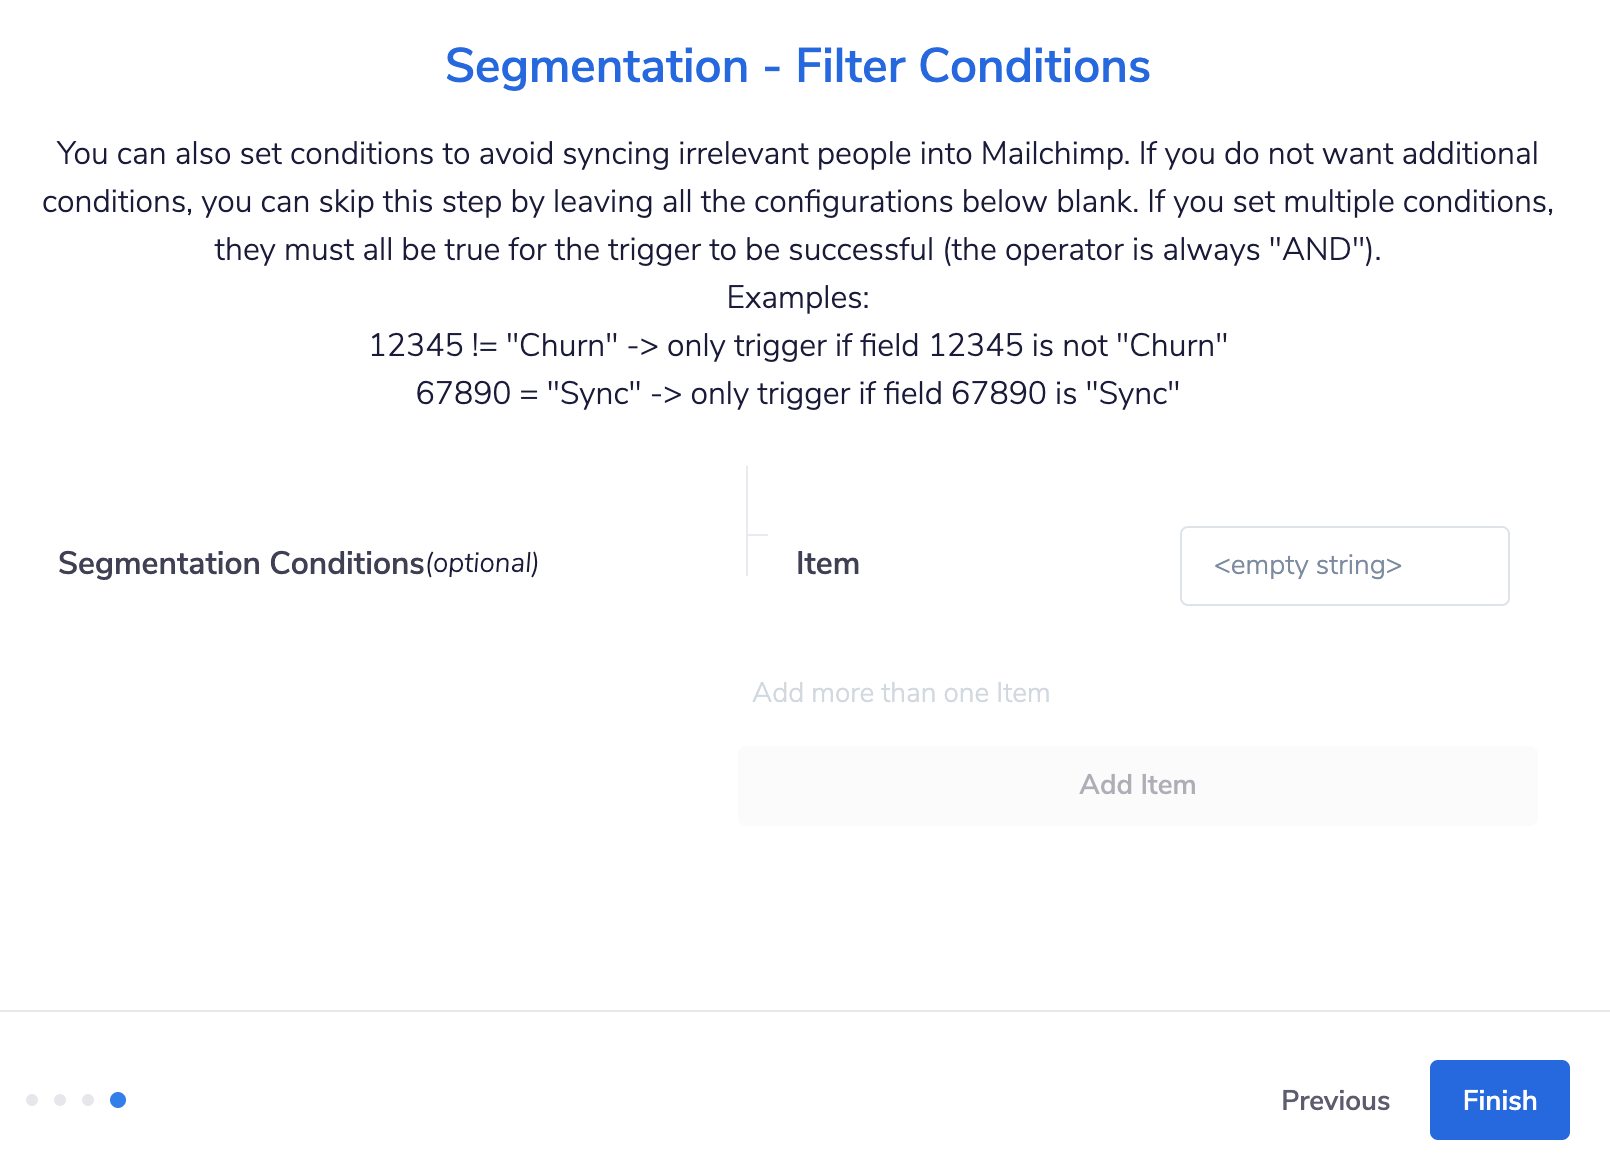 Mailchimp_Additional_Filter_Conditions.png